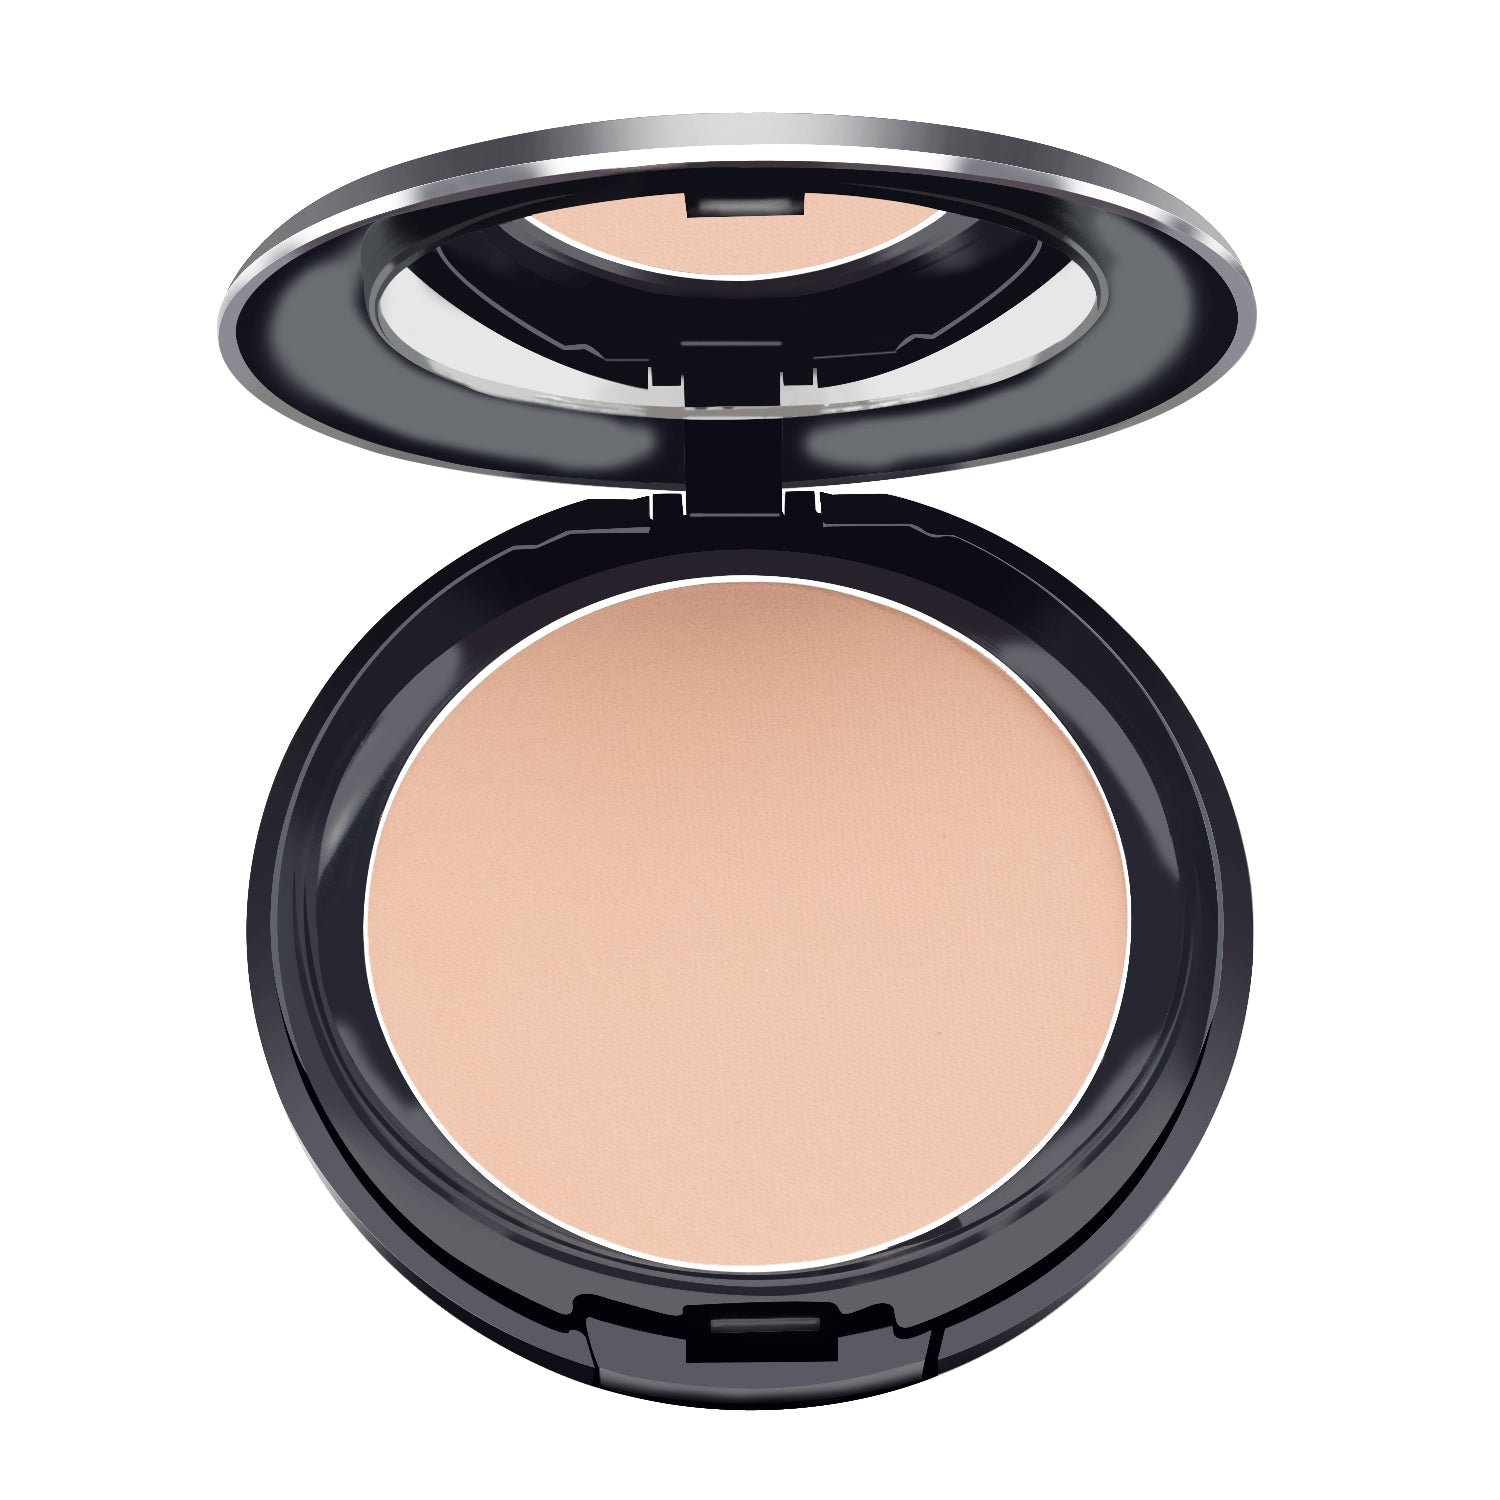 Glamgals Hollywood-U.S.A 3 In 1 Three Way Cake Compact Makeup+ Foundation + Concealer Spf 15, (Natural Skin) - BUDNE